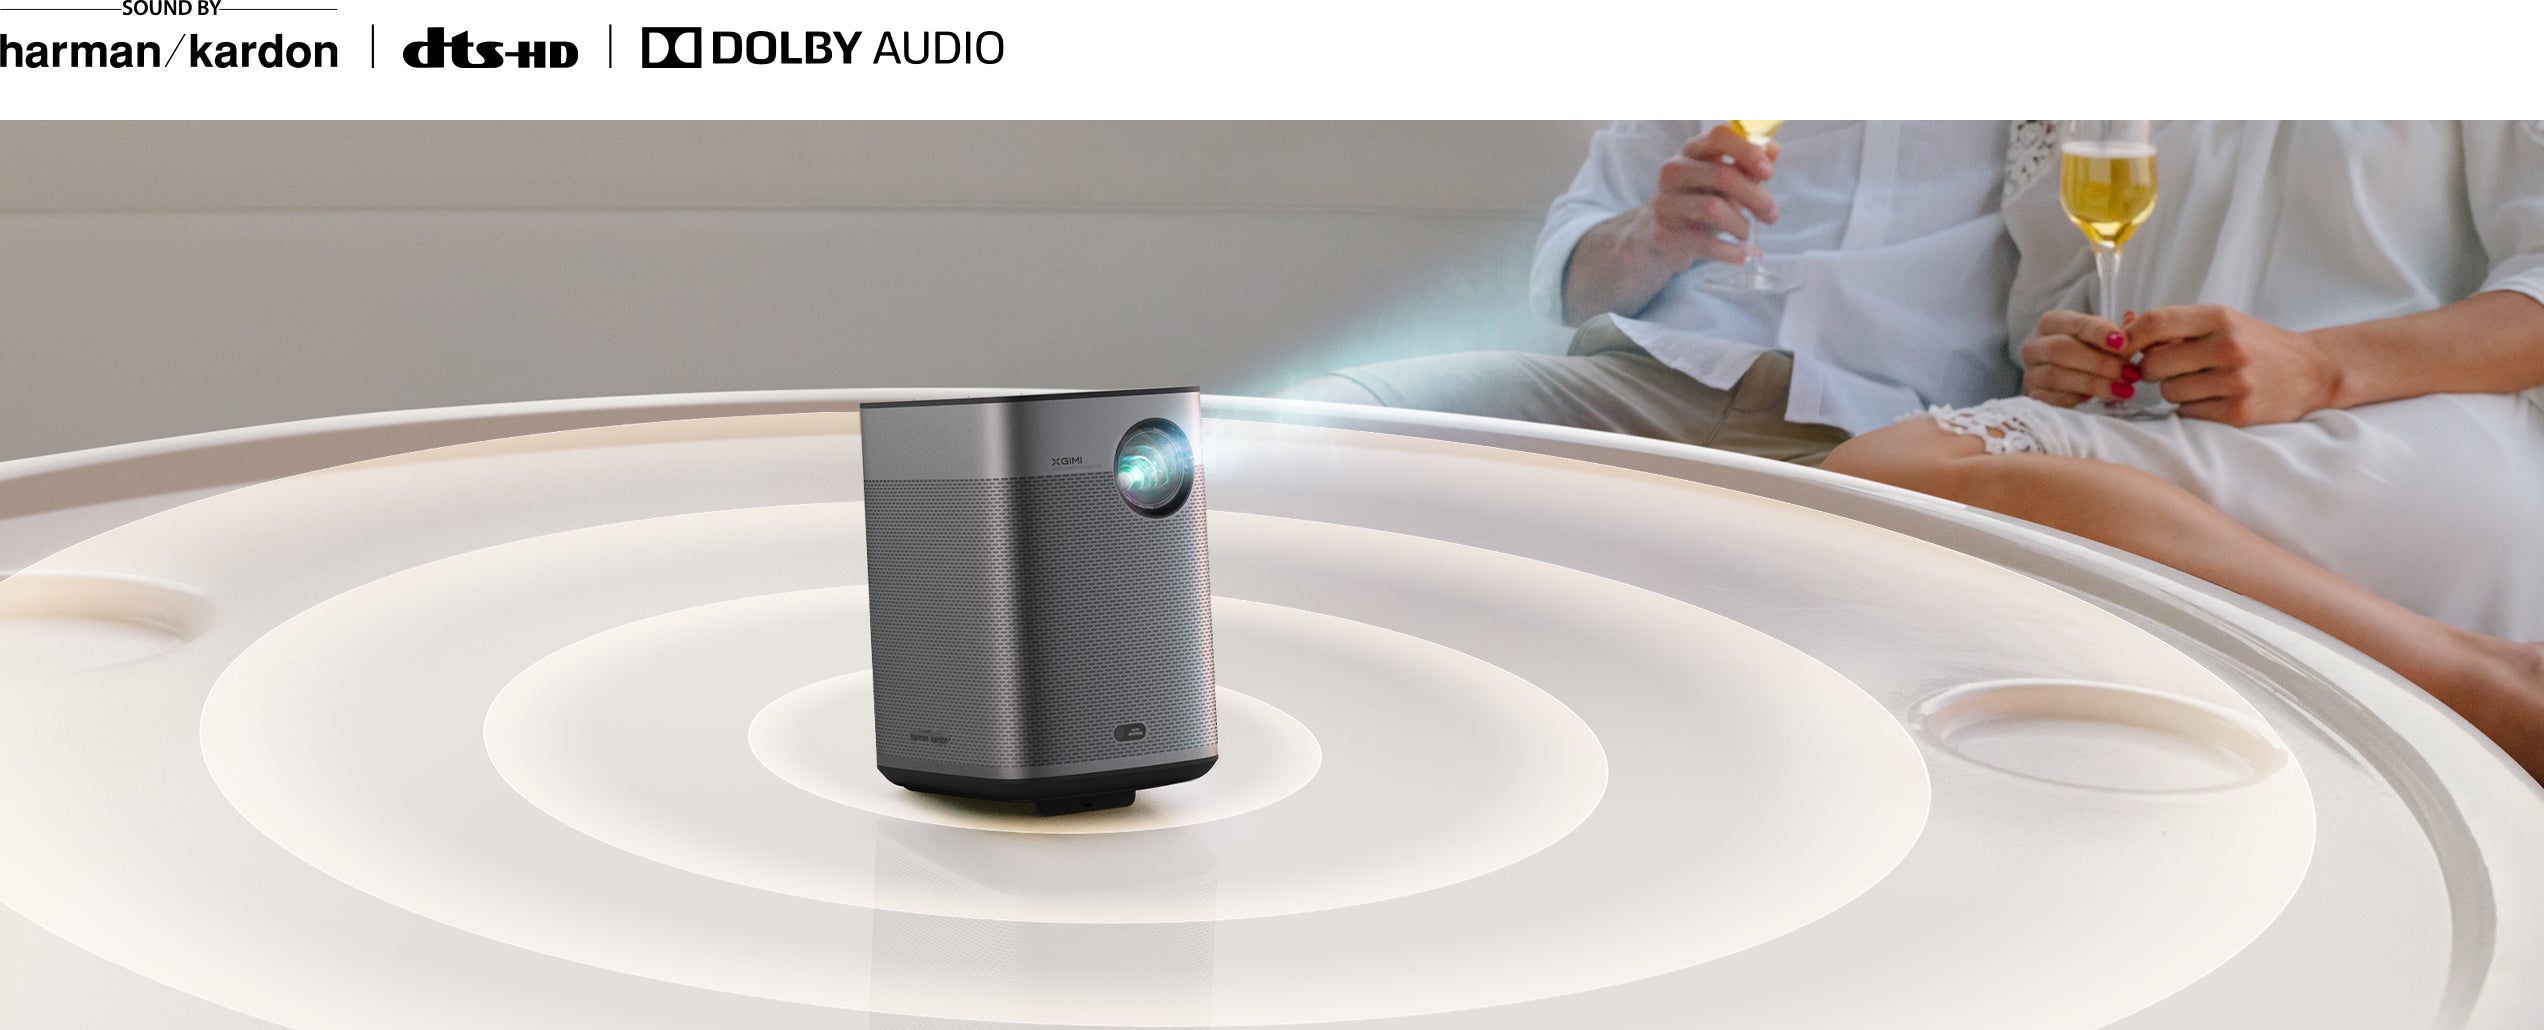 Halo Plus - The latest XGIMI portable projector